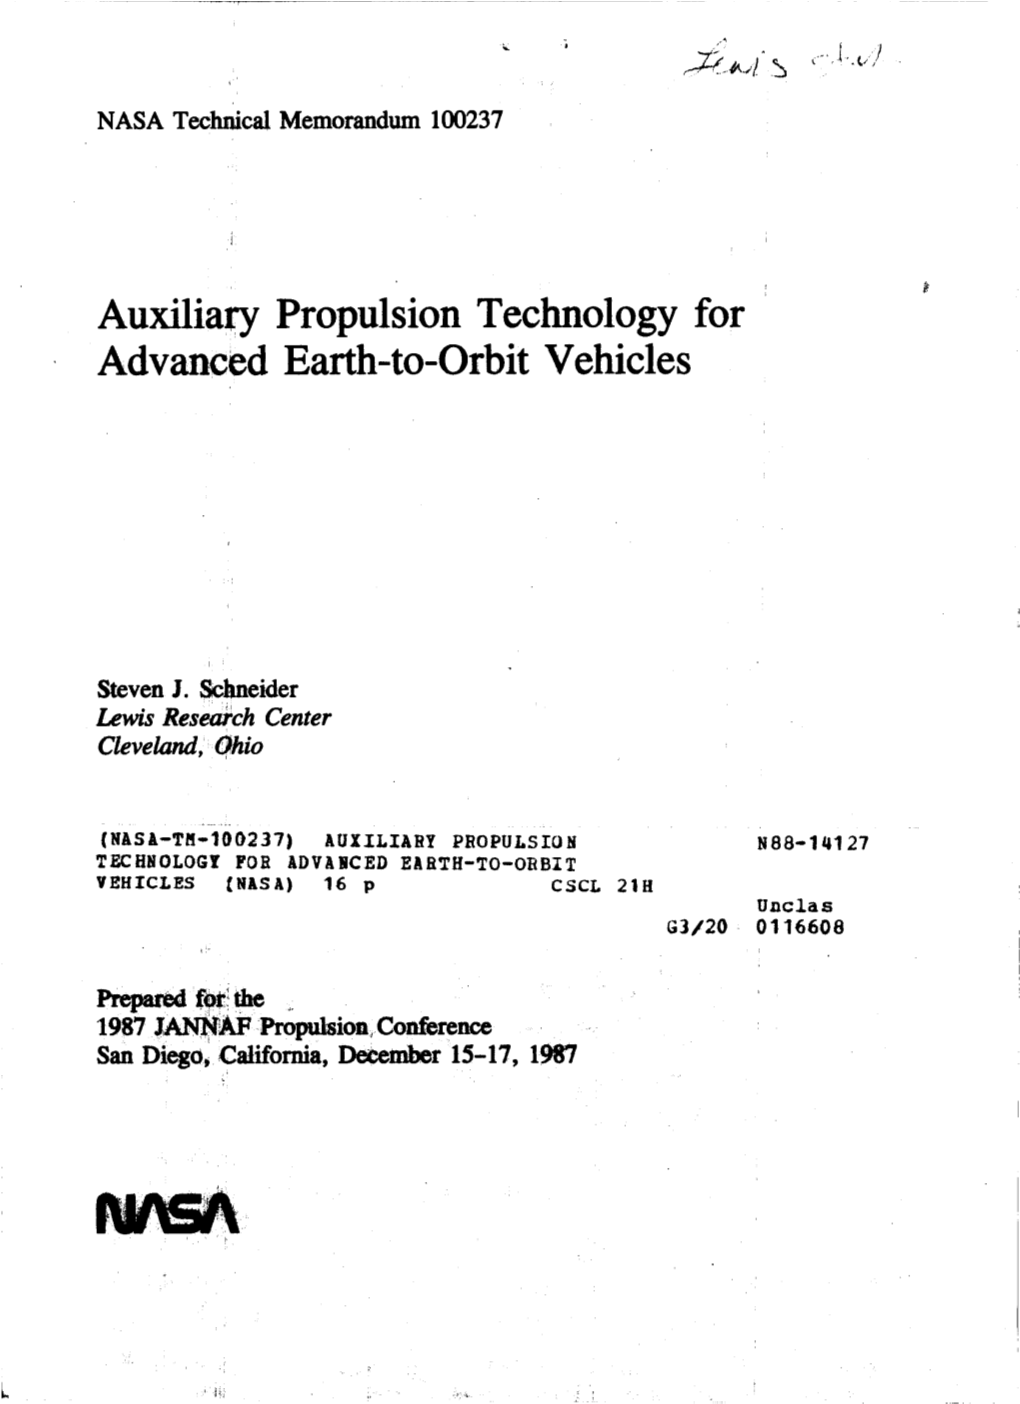 Auxiliary Propulsion Technology for Advanced Earth-To-Orbit Vehicles